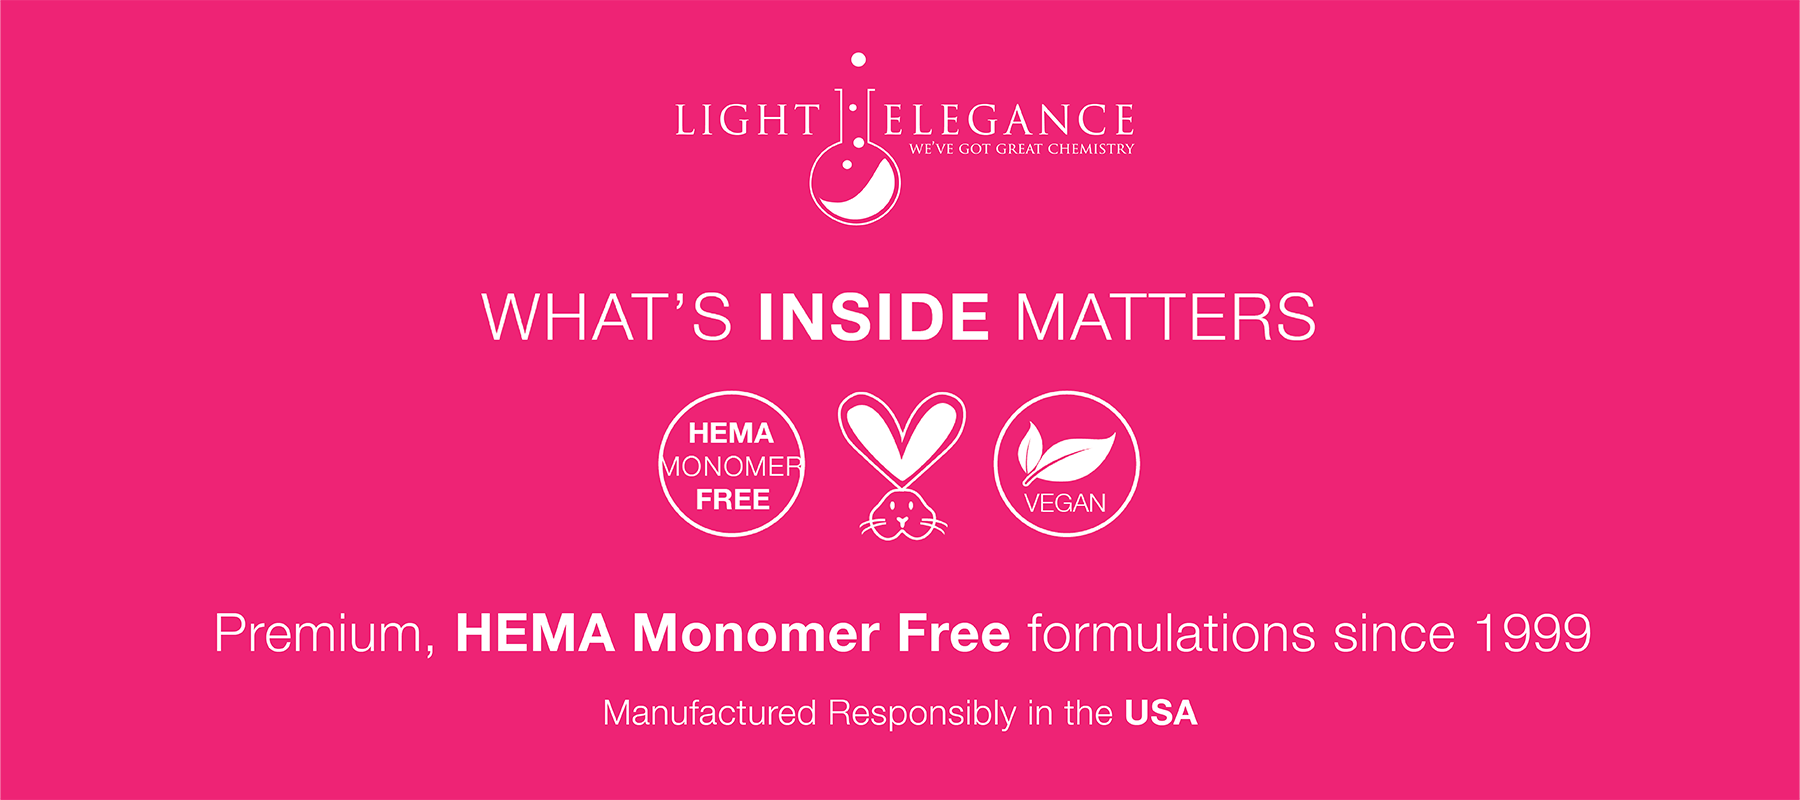 LE is More Than Just a HEMA Free Gel Nail Brand | We believe 'What's Inside Matters' | Chemistry, Quality, Community | Why LE Chooses to be HEMA Free